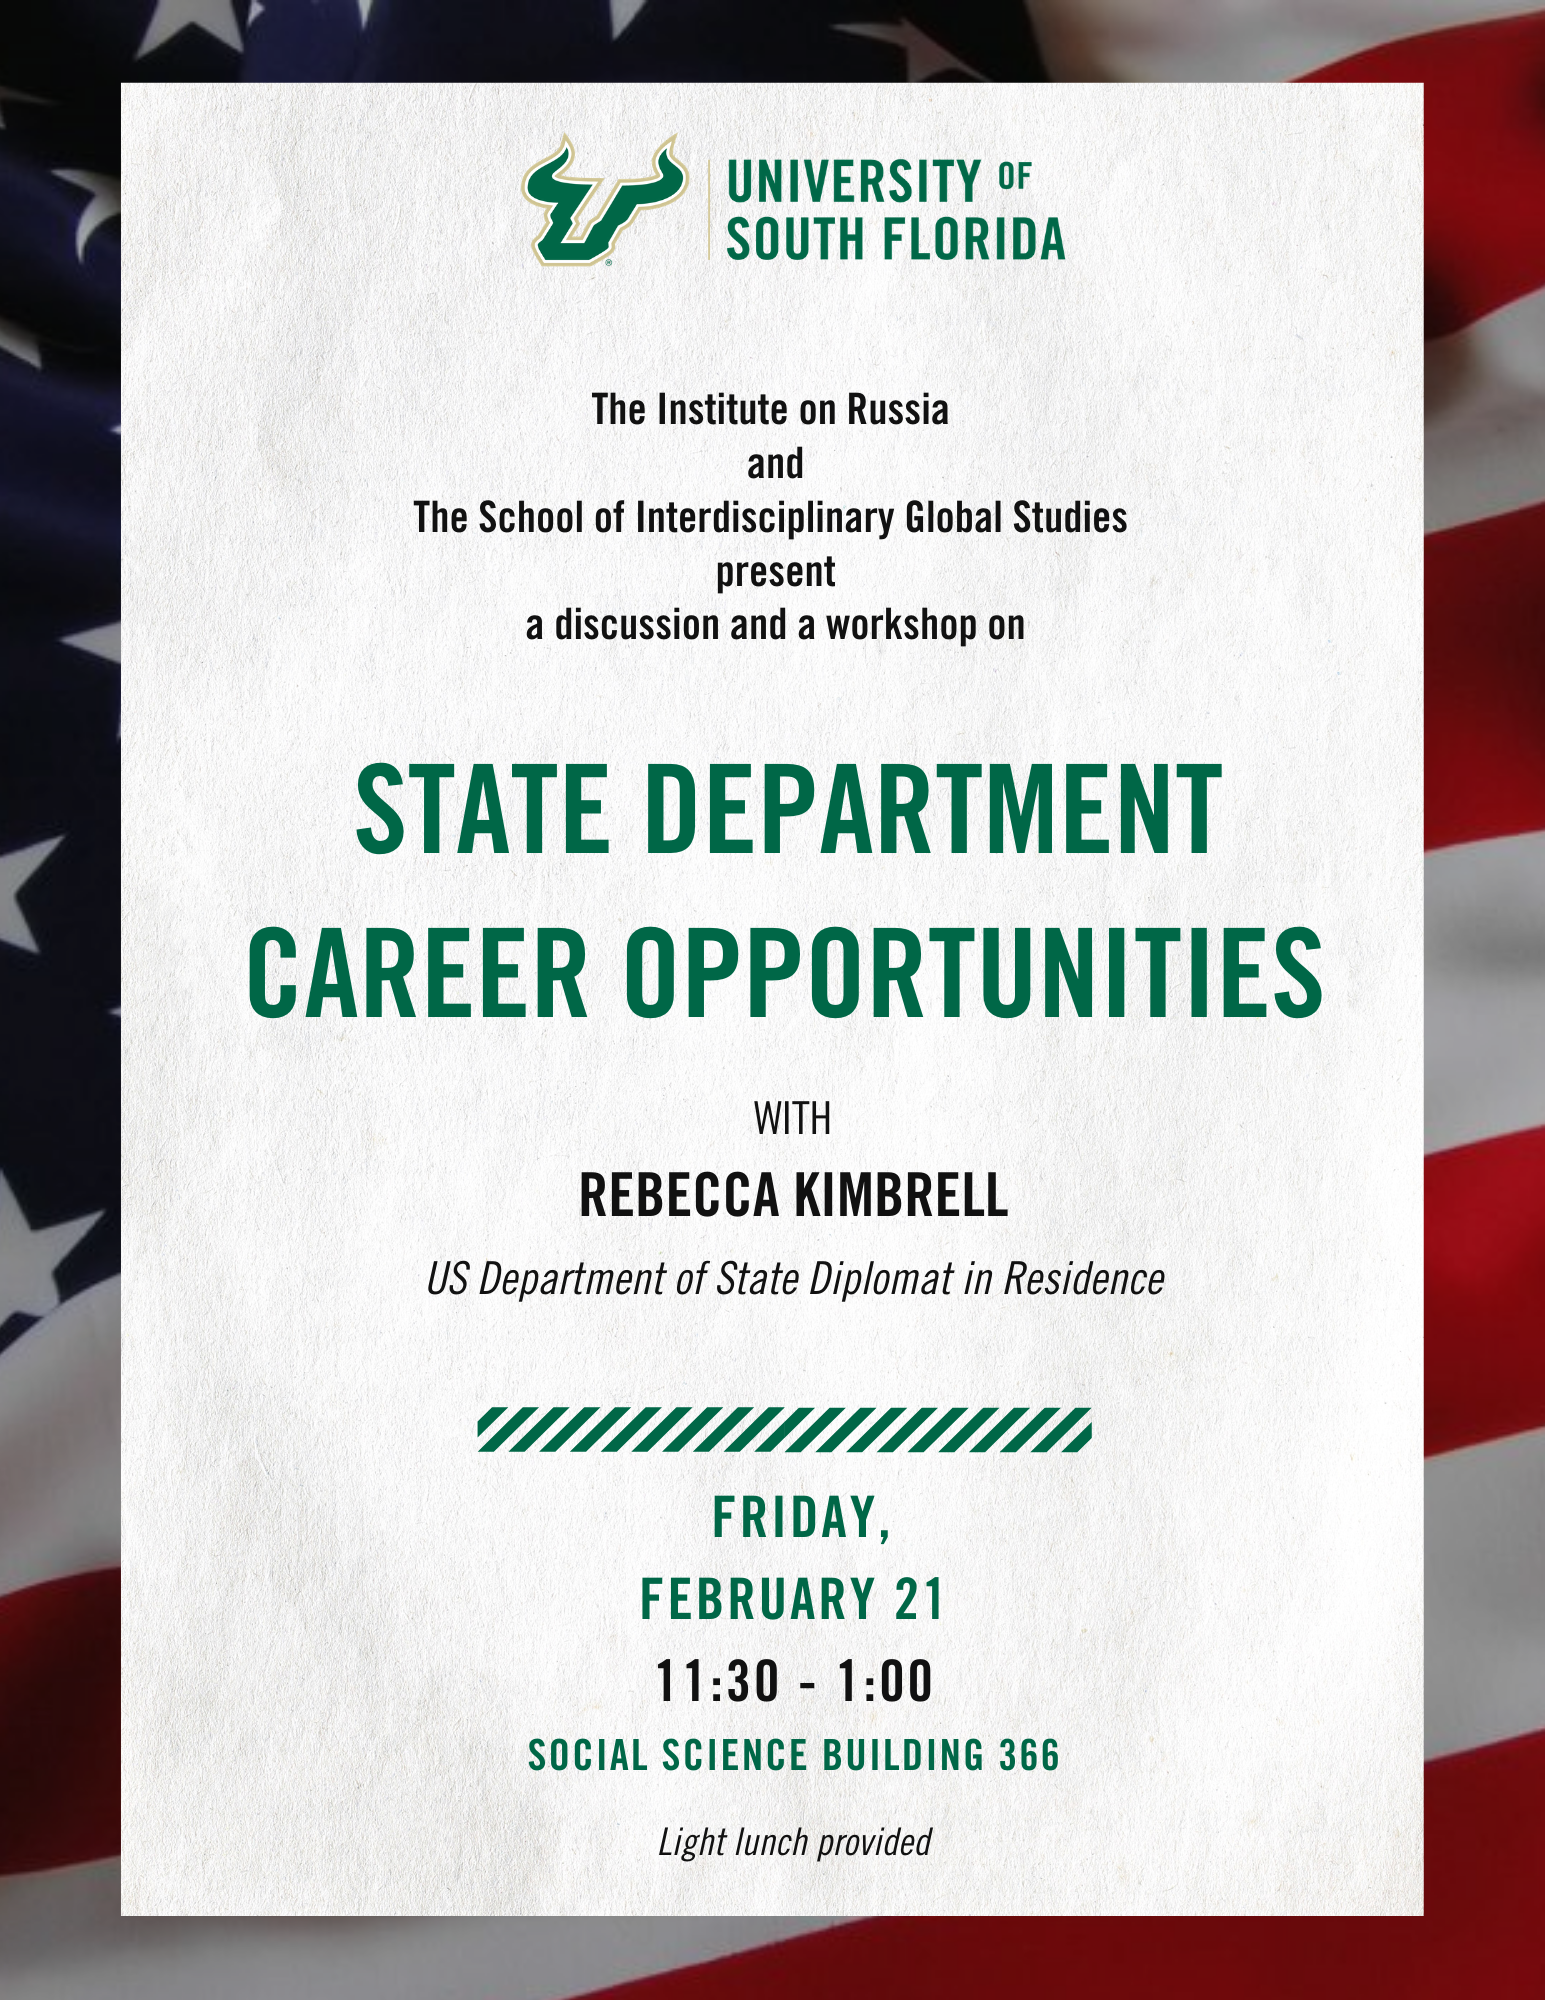 State Department career opportunities flyer